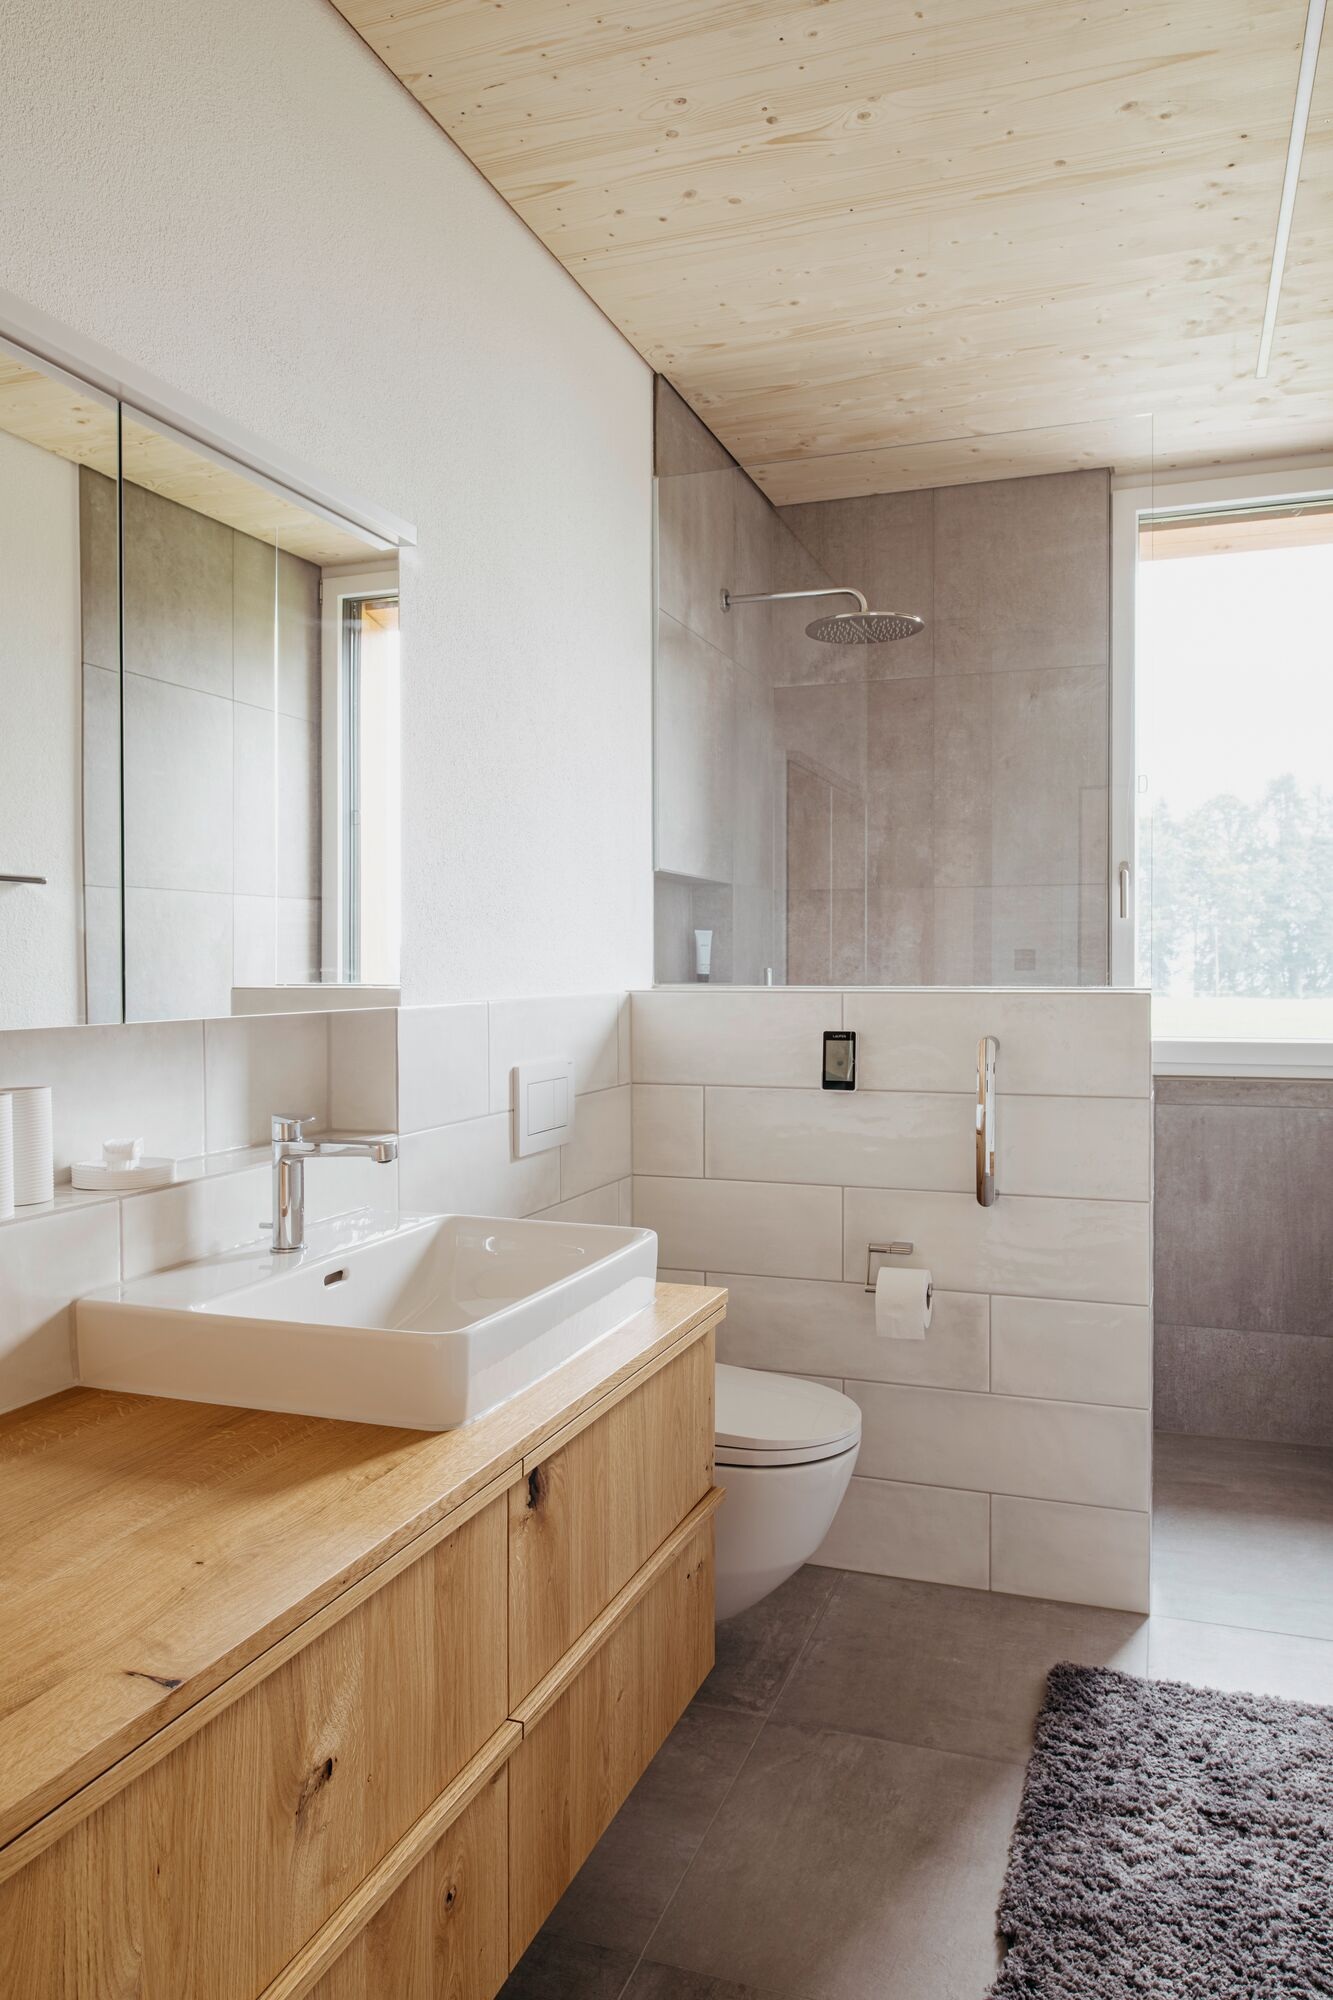 Bathroom with grey stone, timber and white elements